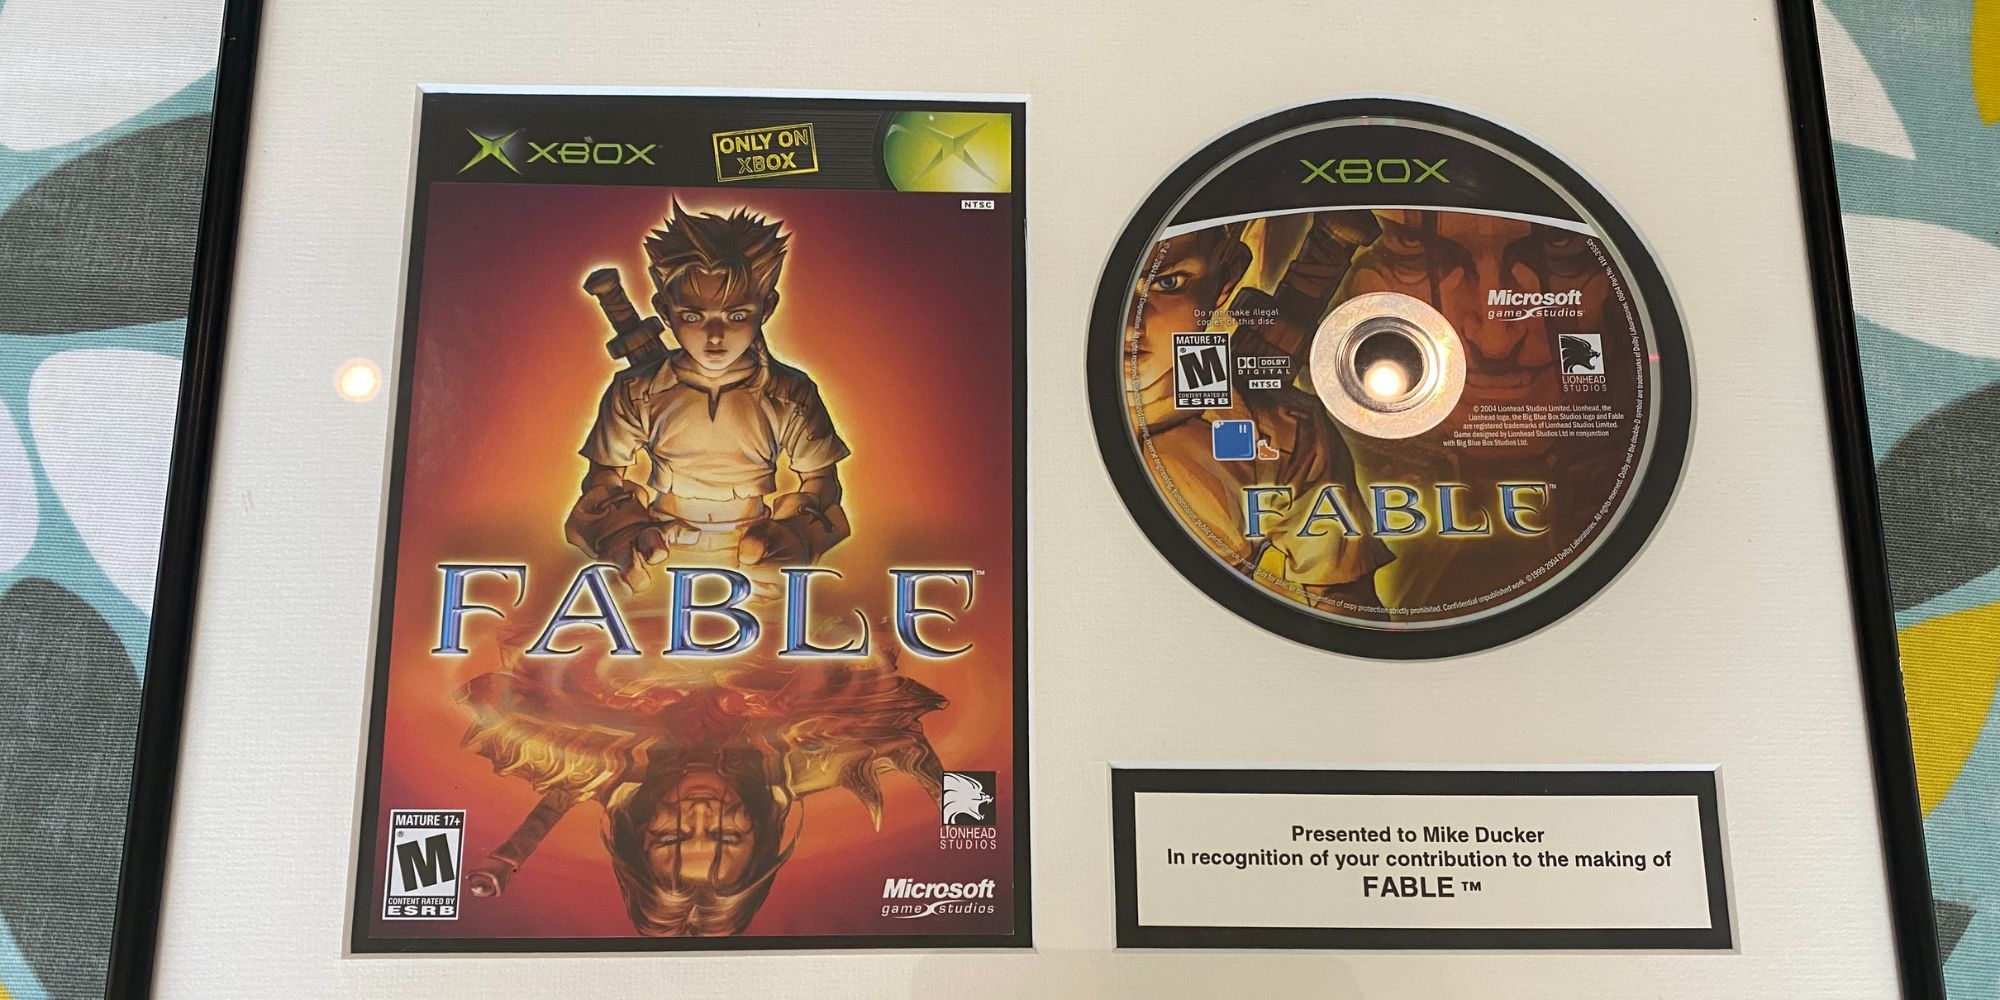 Former Fable Dev Finds His Own Commemorative Plaque On Ebay After It Was Presumed Stolen In 2012